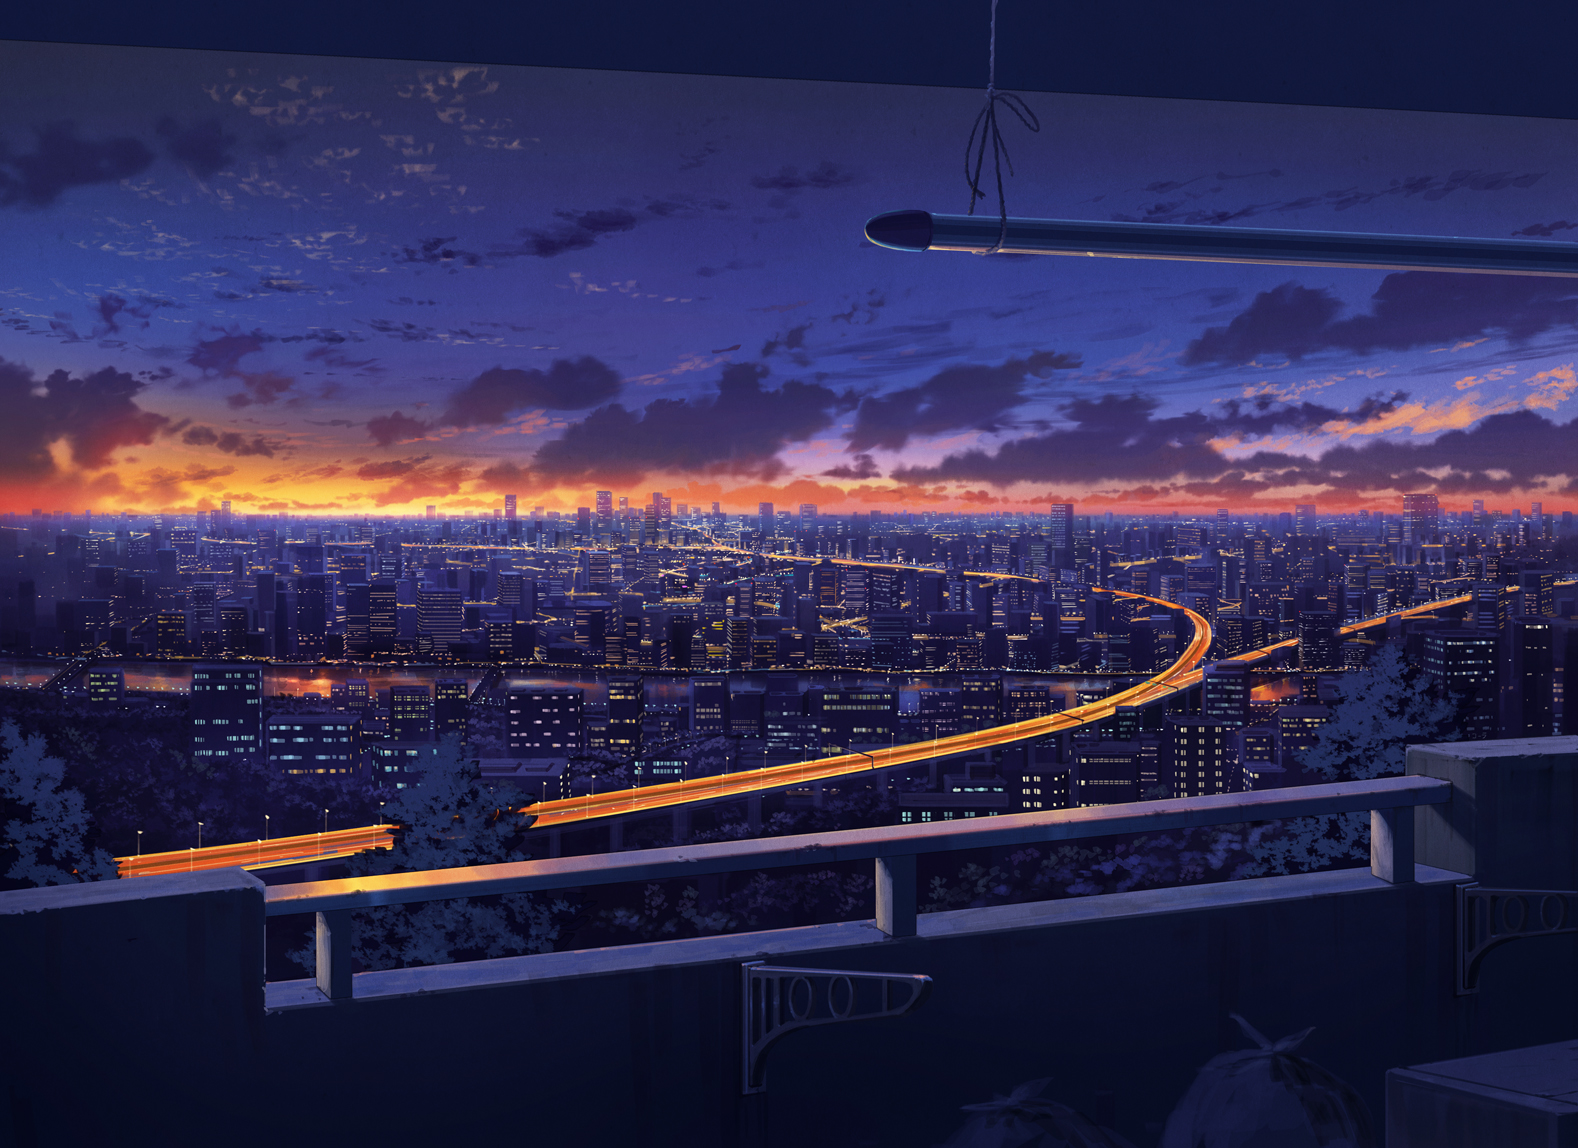 Anime Landscape: Anime City from the balcony Background